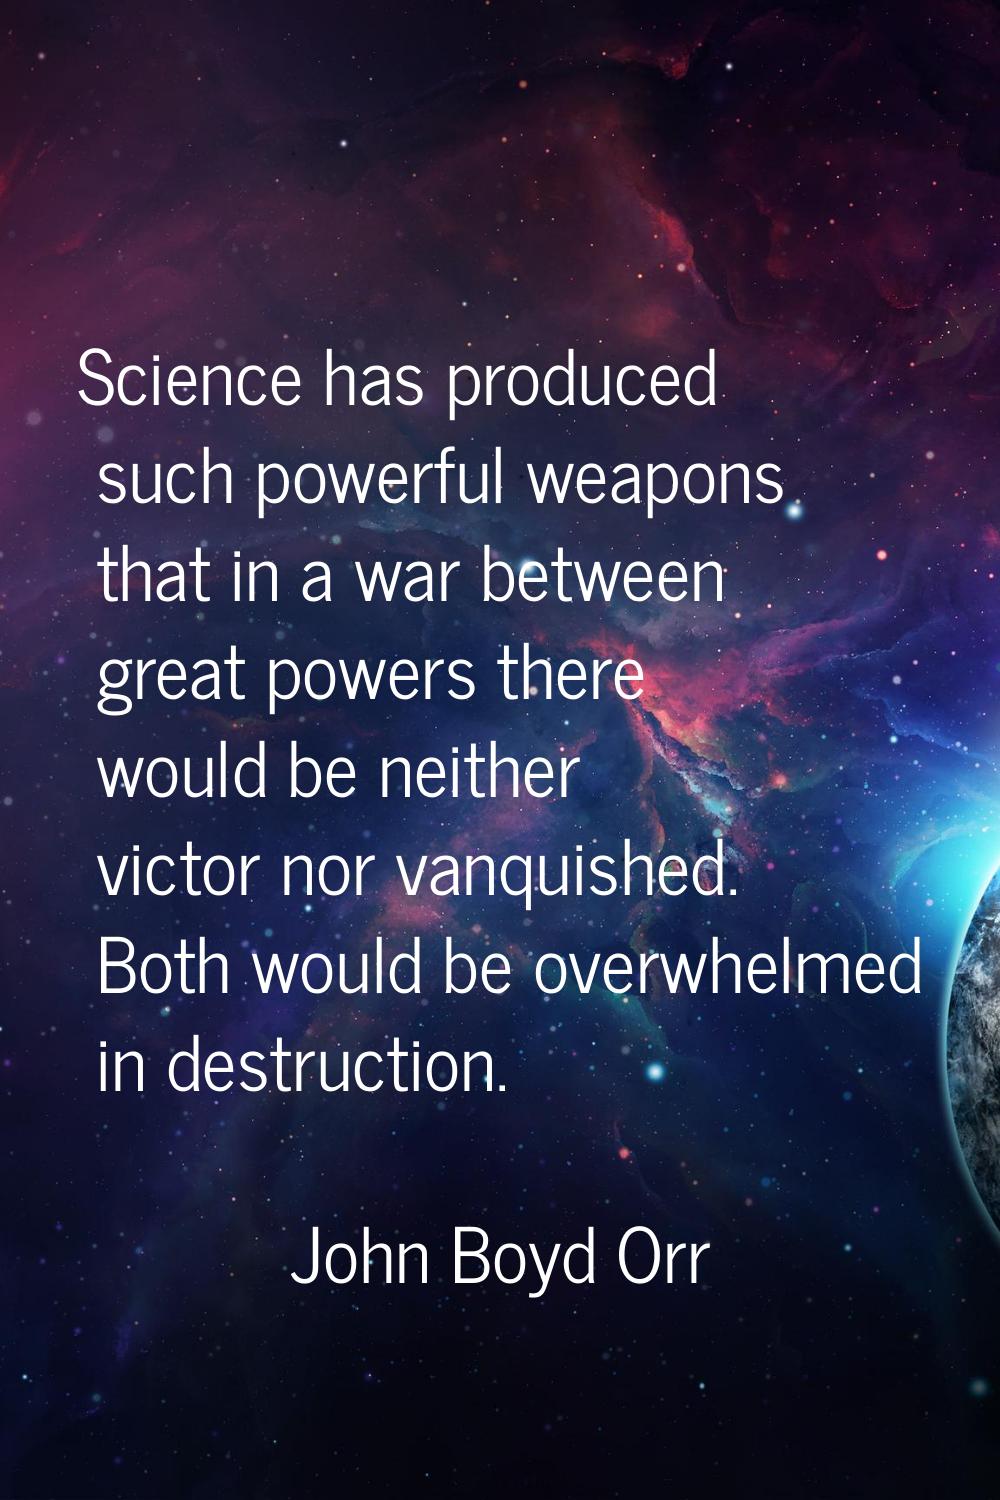 Science has produced such powerful weapons that in a war between great powers there would be neithe